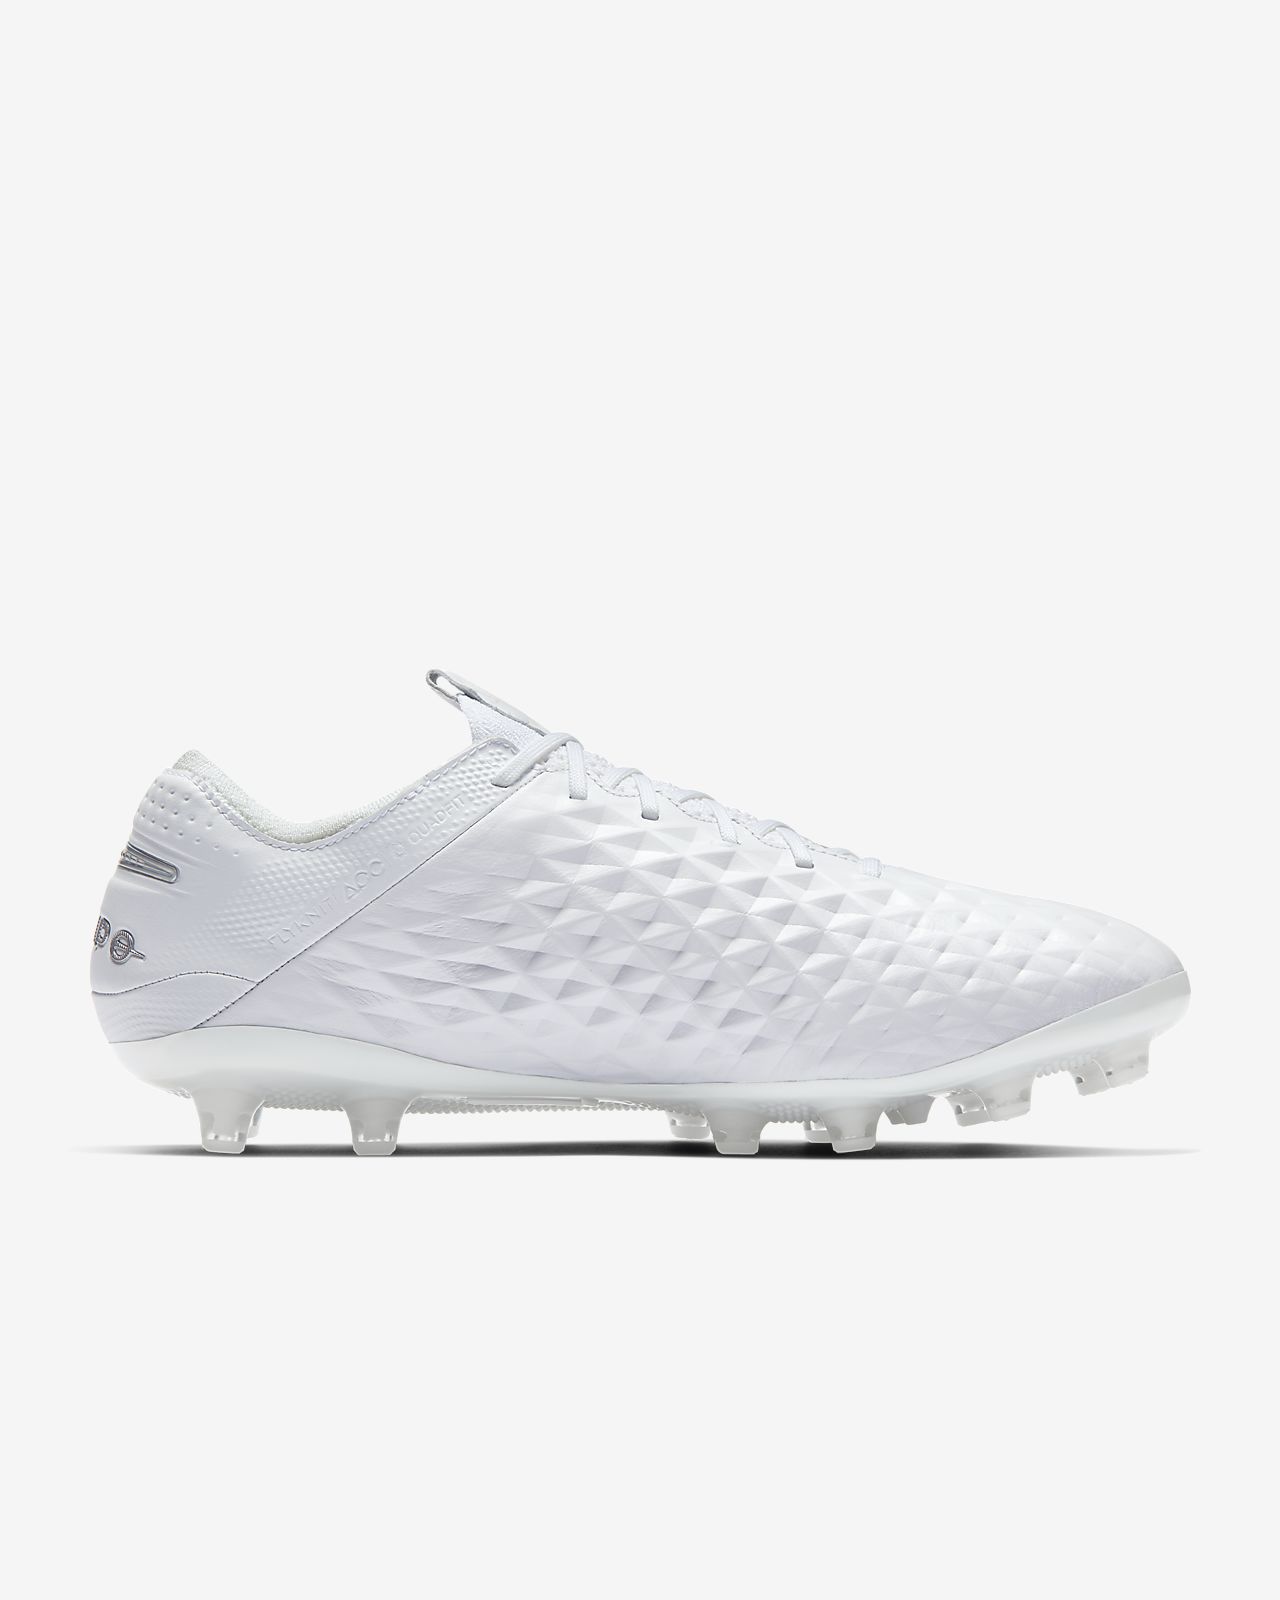 Nike Weather Legend 8 Academy AG White soccer